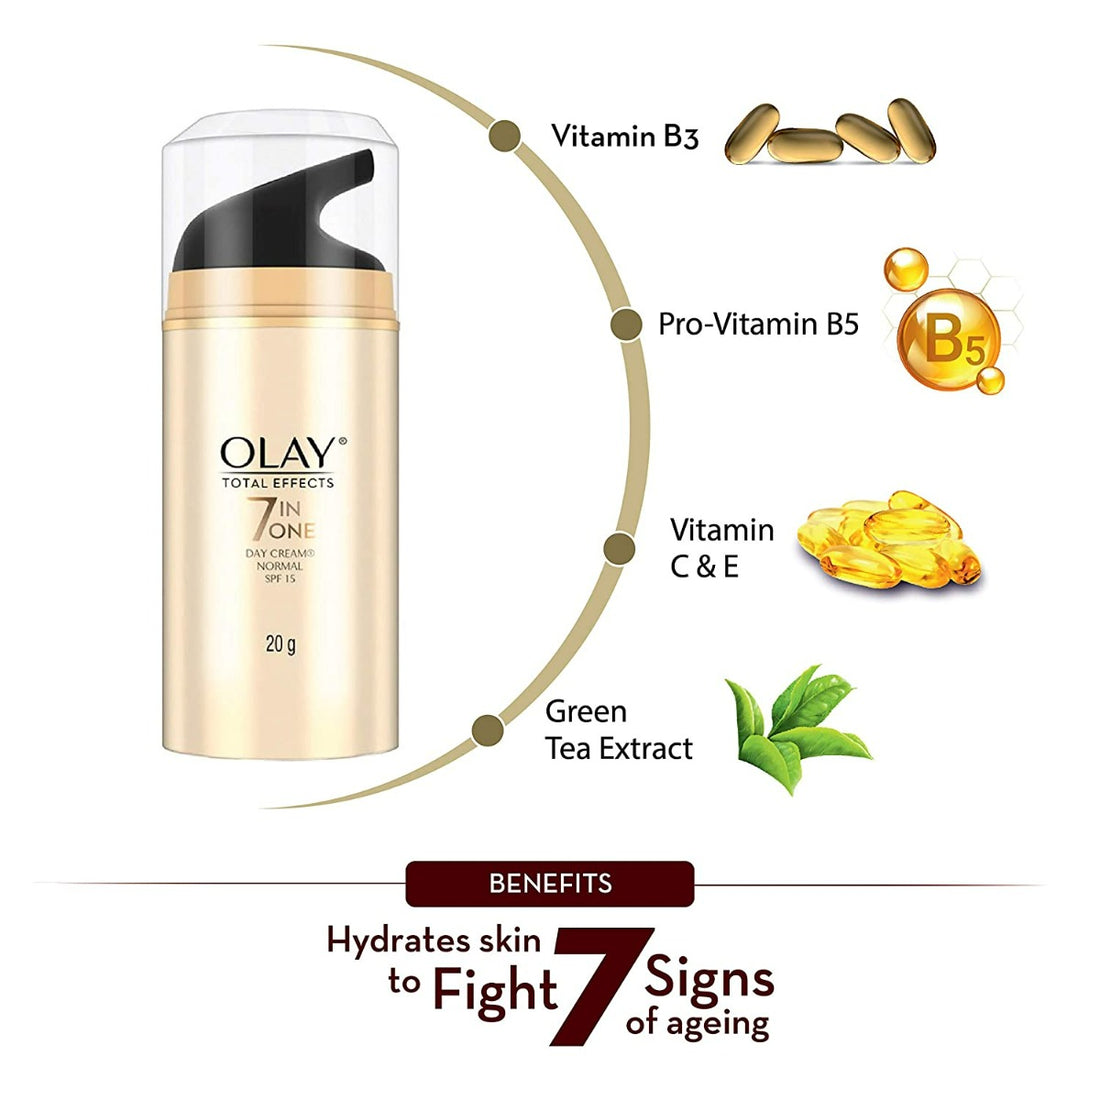 Olay Total Effects 7 in 1 Day Cream Normal (20gm)